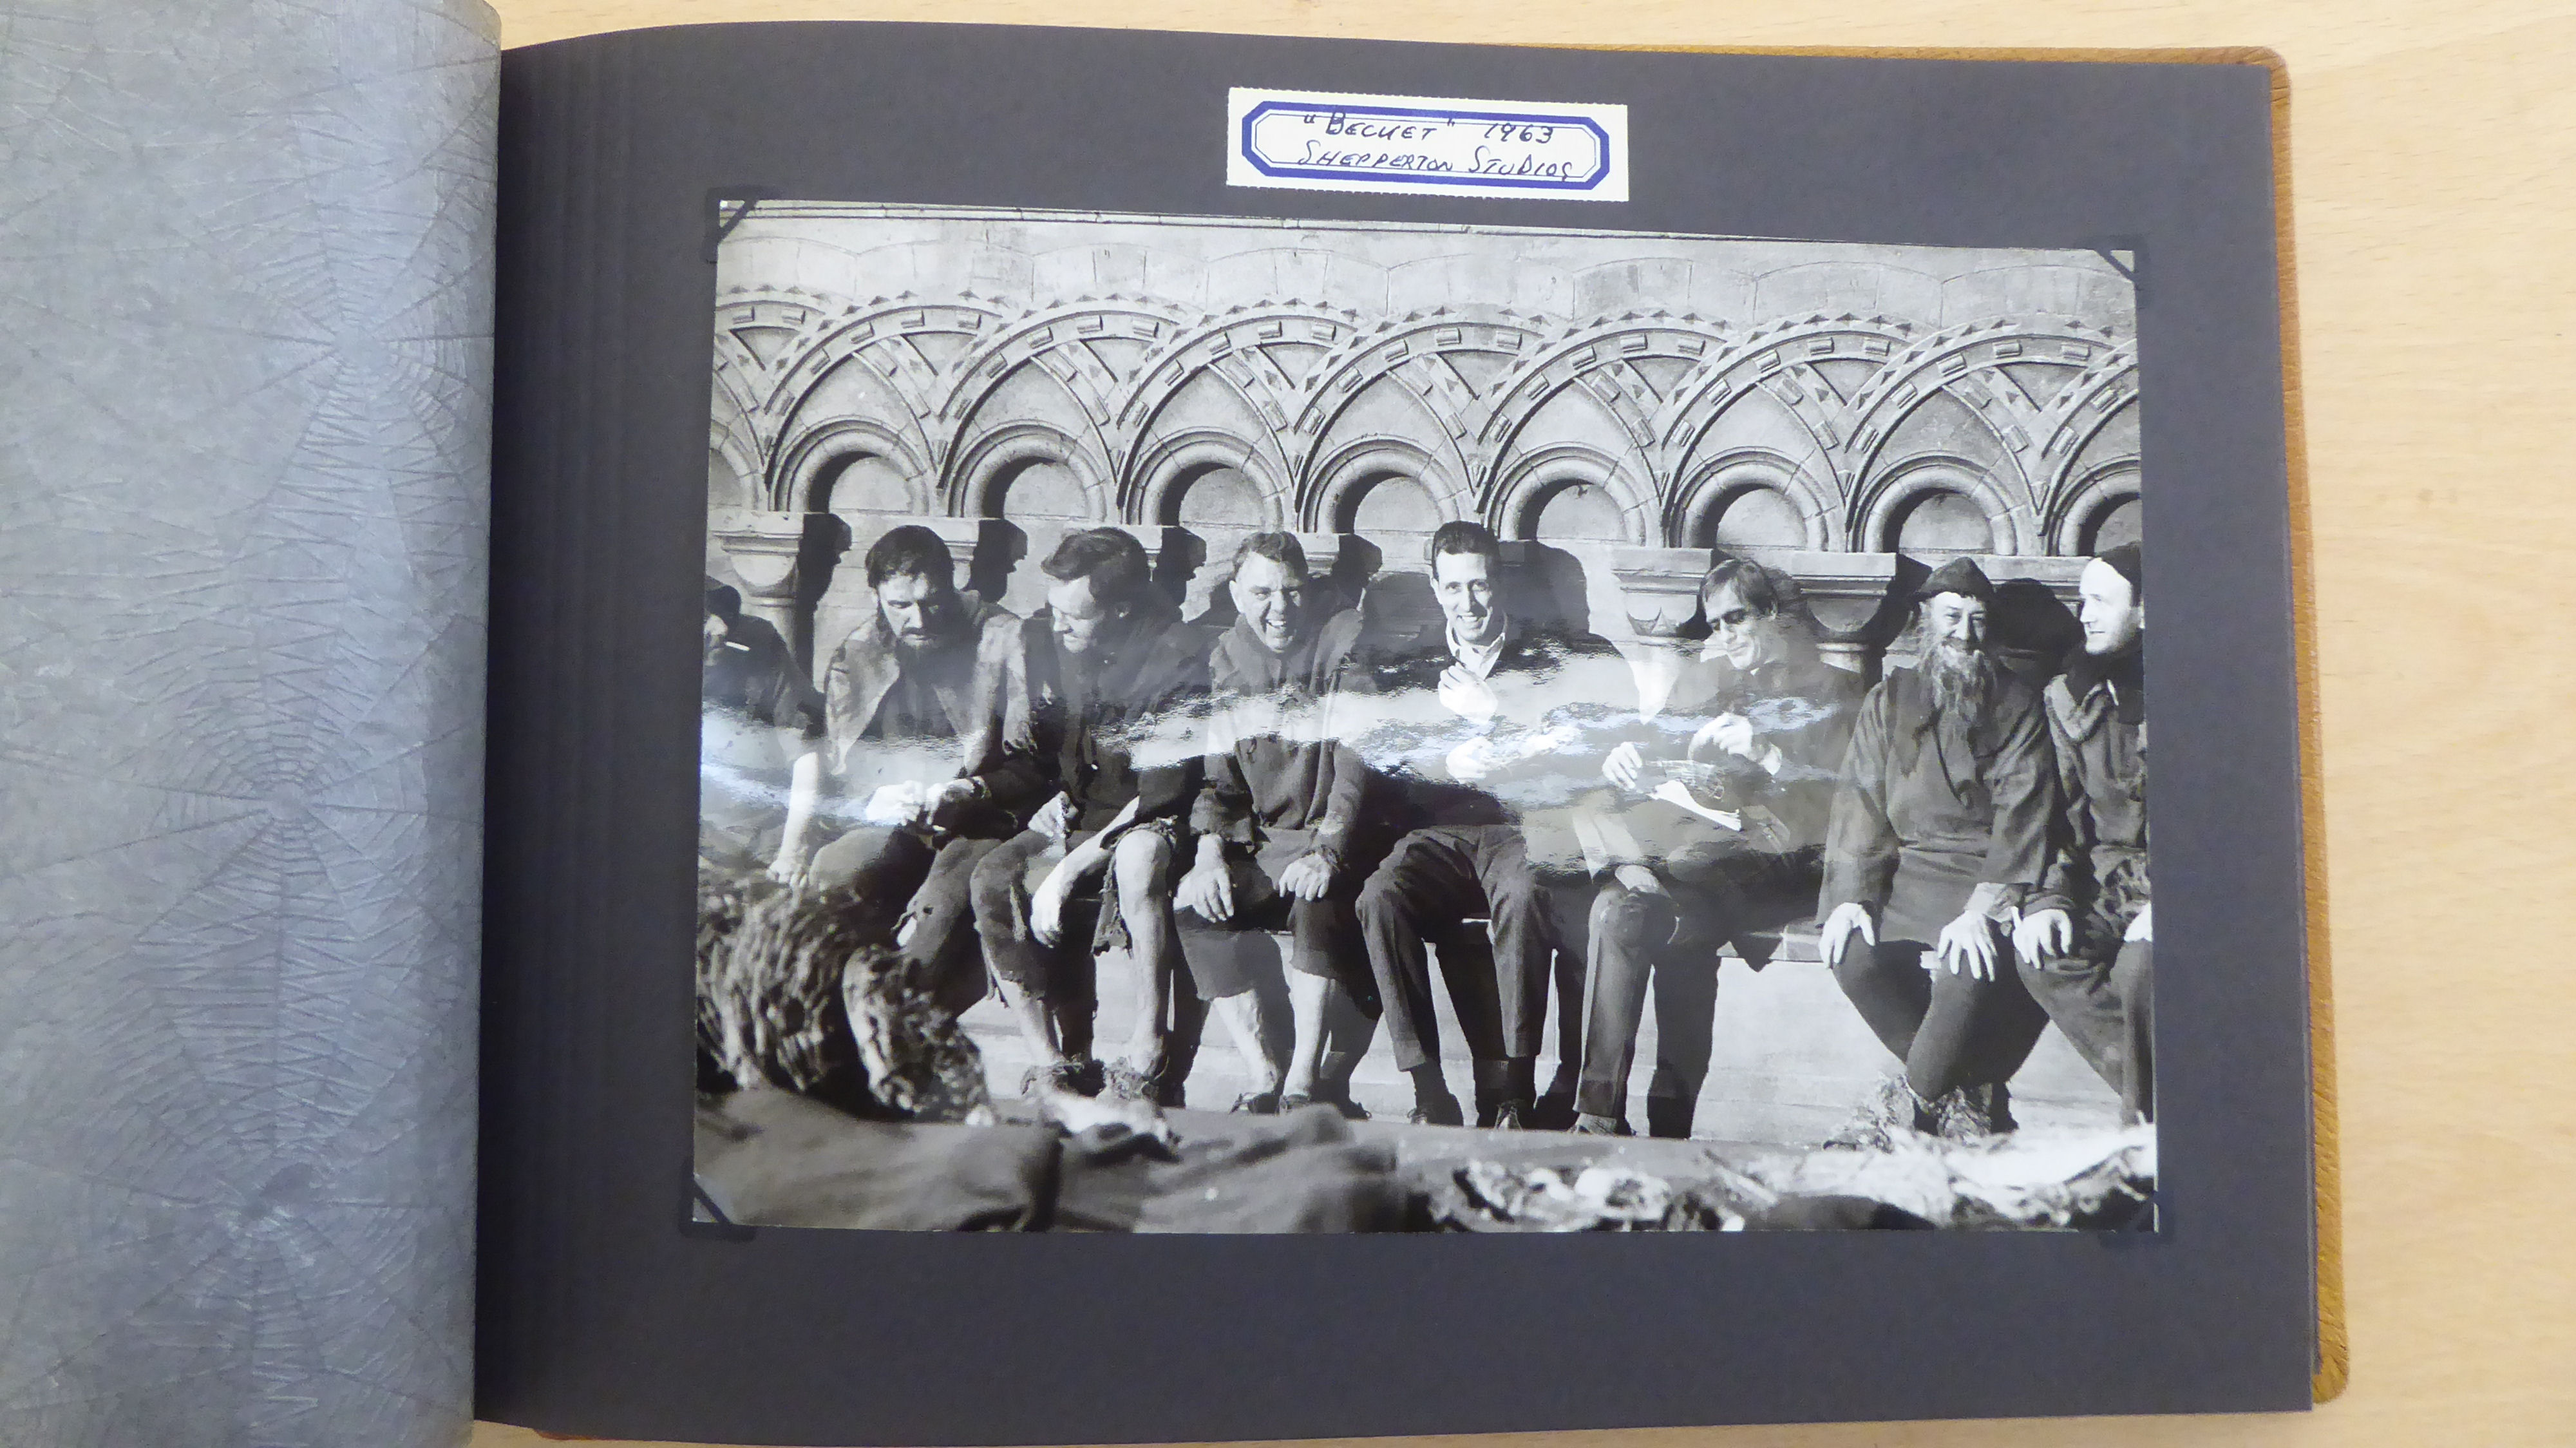 An album containing 1960s monochrome photographs, taken from Shepperton Studios; featuring Bob Hope, - Image 5 of 7